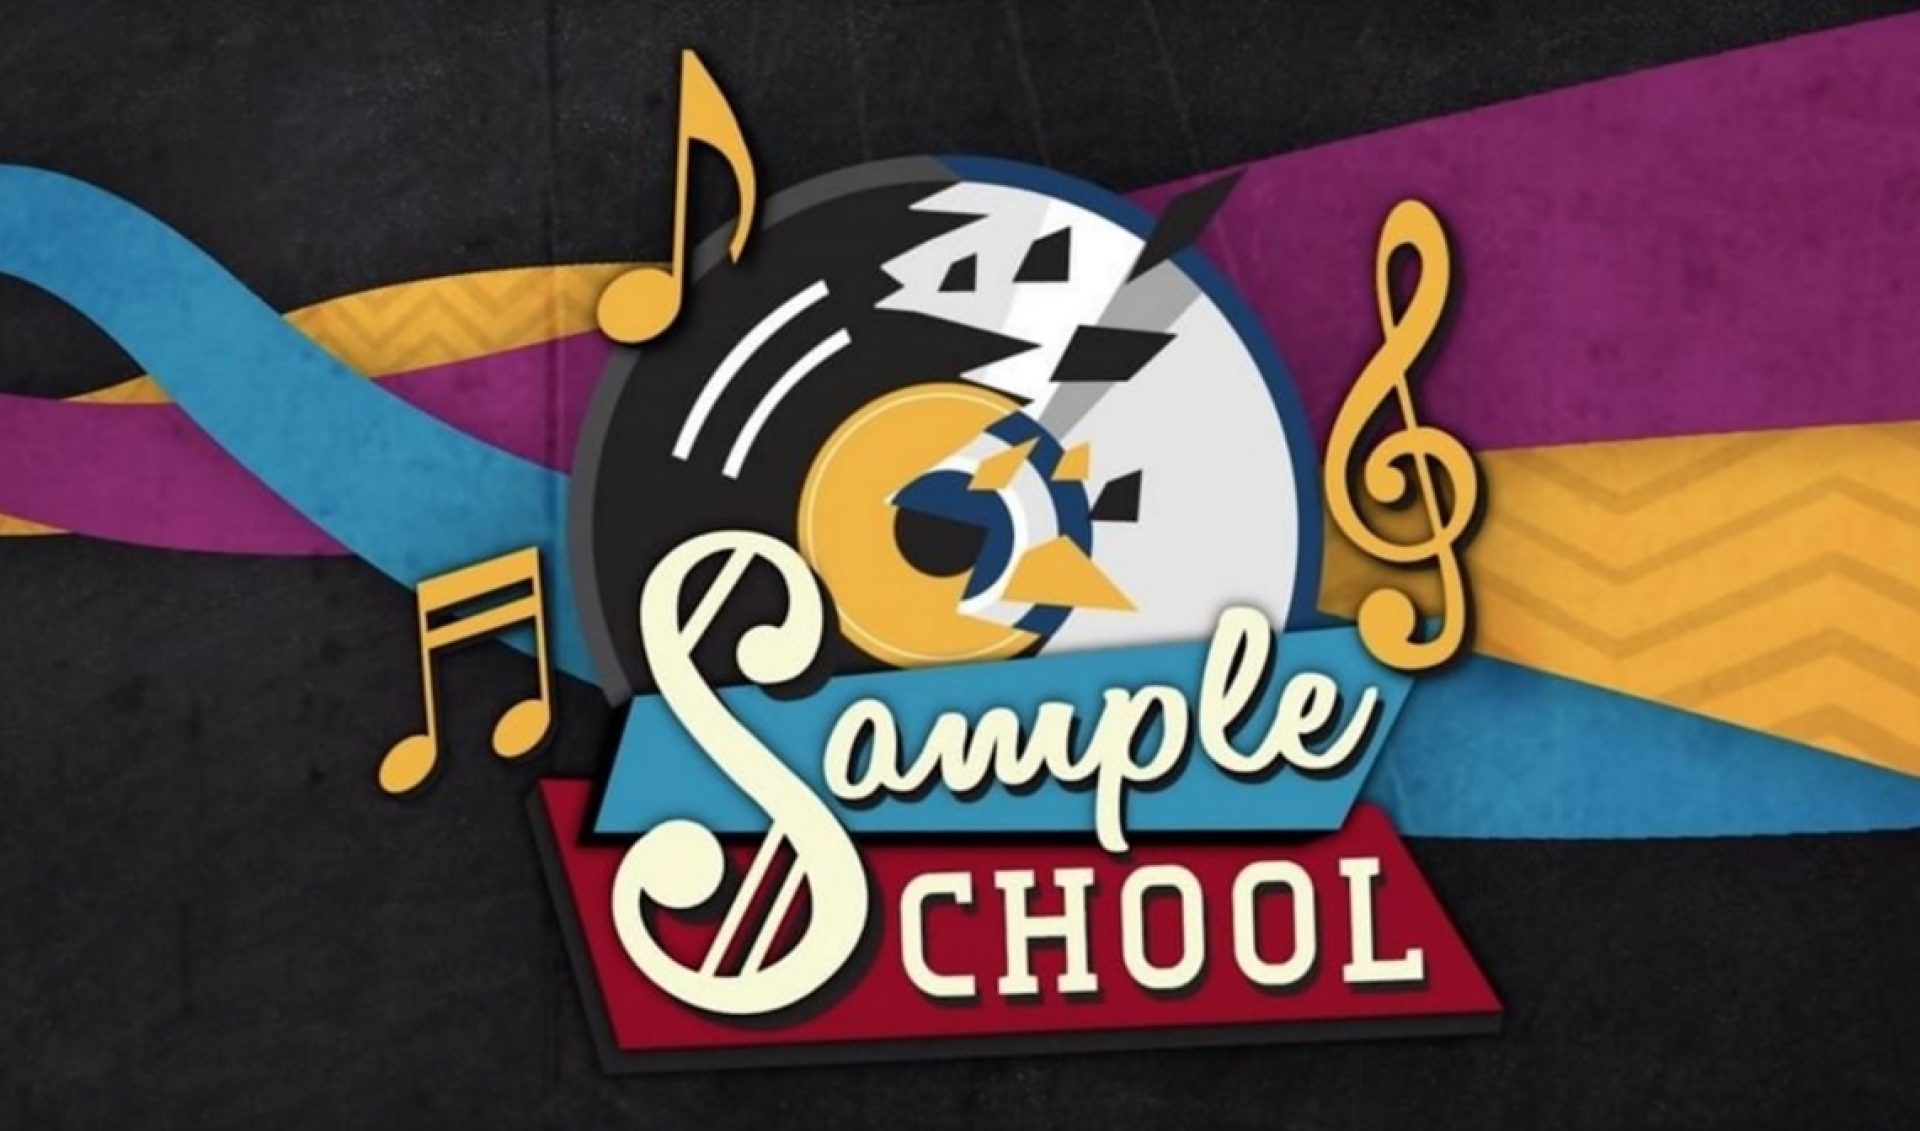 Fine Brothers Entertainment To Dissect Hit Songs In New ‘Sample School’ Series